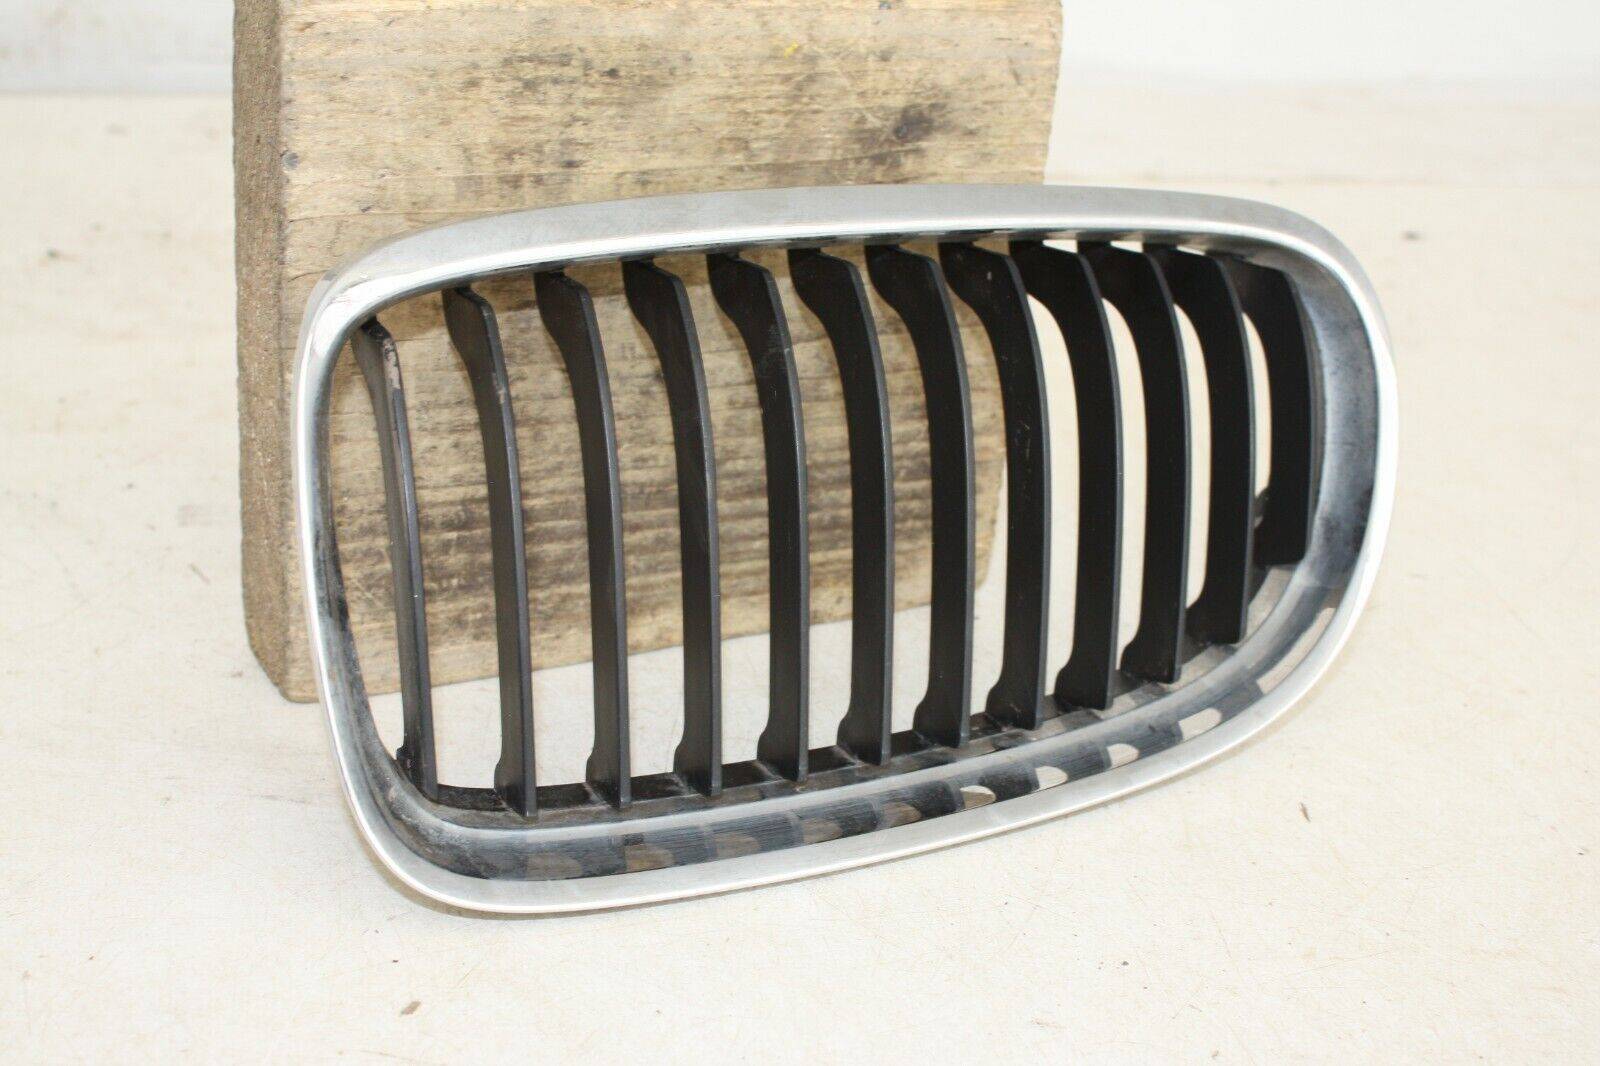 BMW-3-SERIES-FRONT-BUMPER-KIDNEY-GRILL-LEFT-2008-TO-2012-175367532000-6